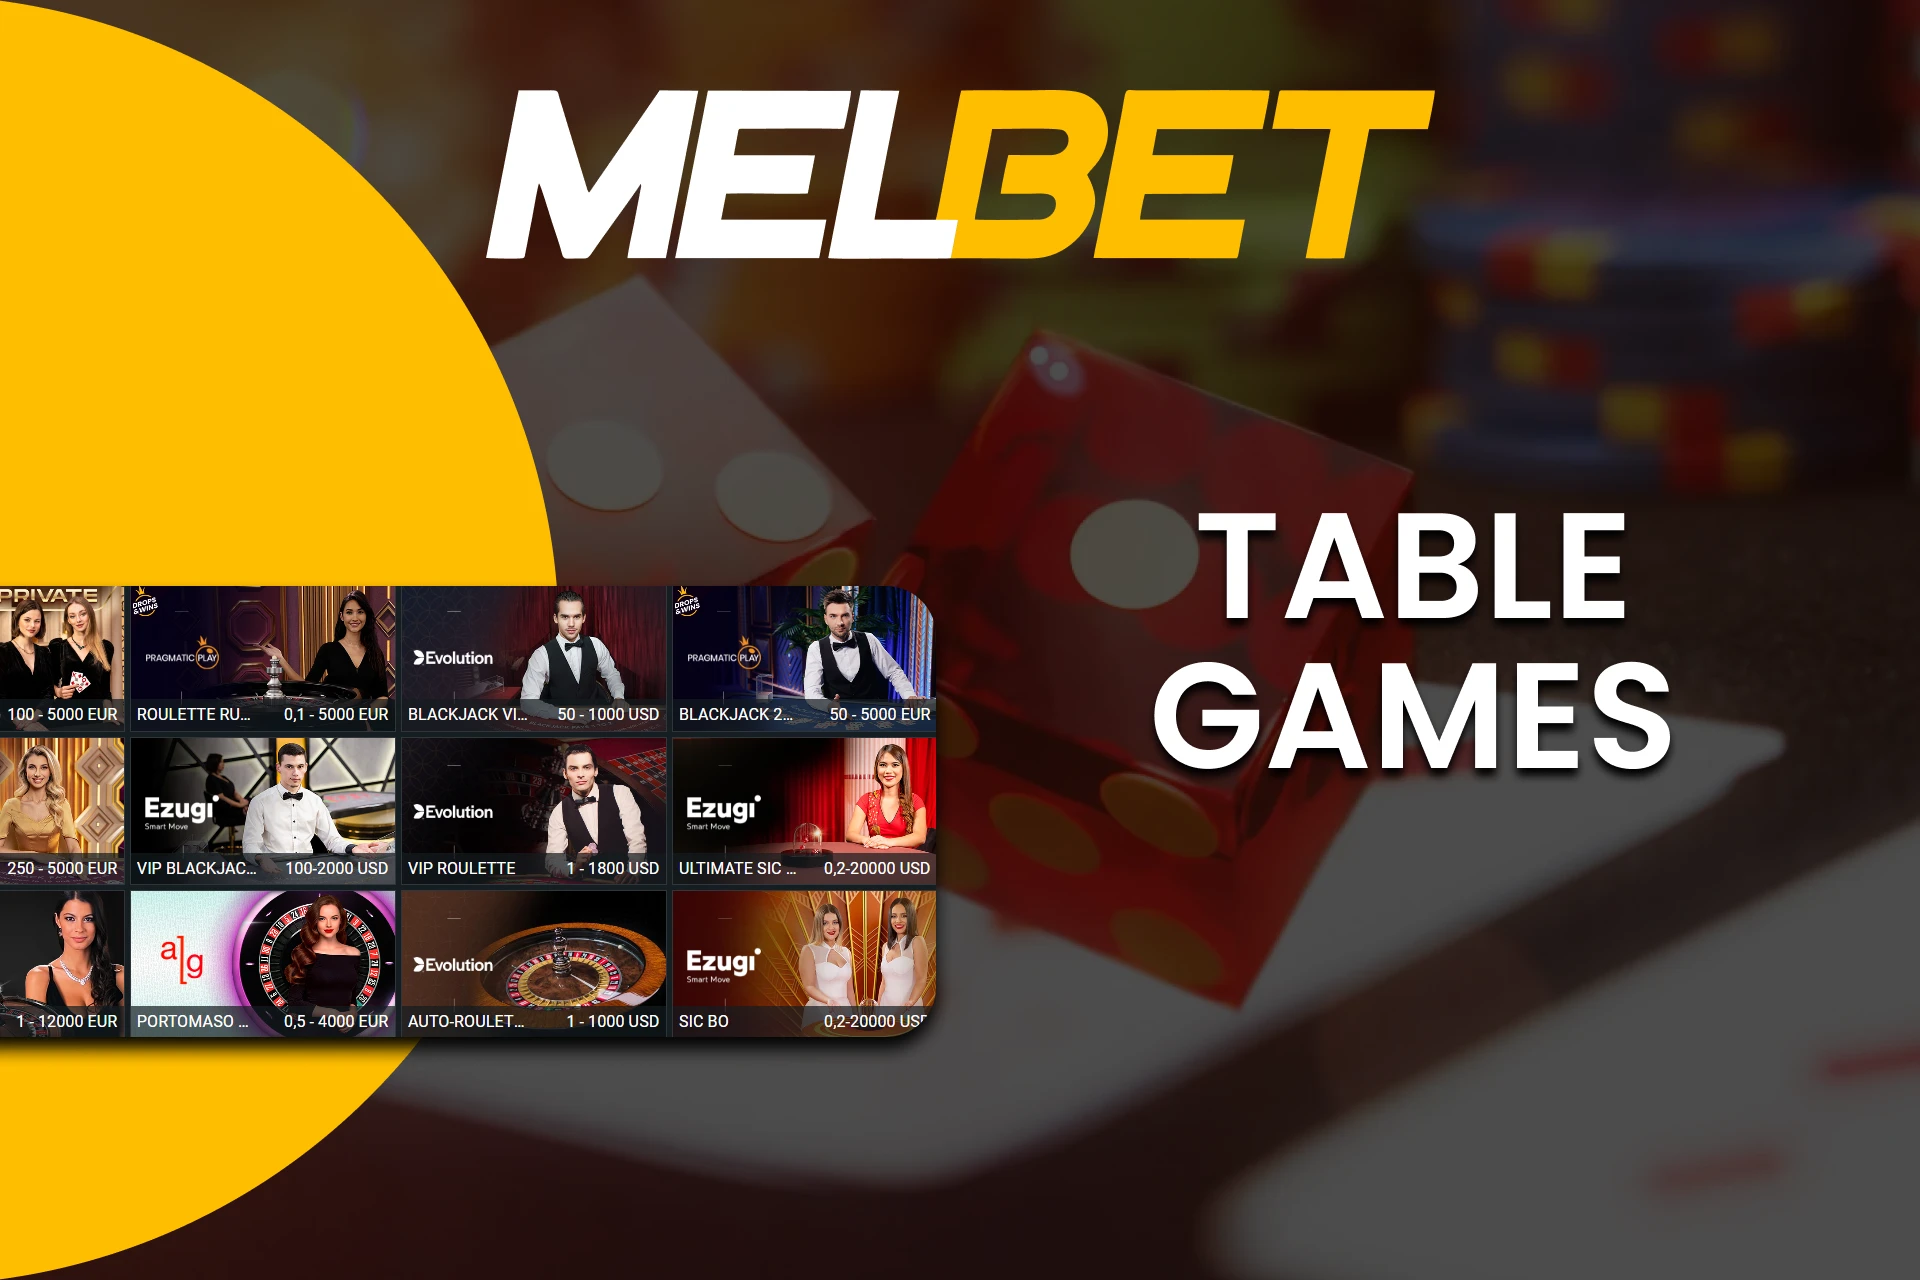 For Melbet Live Casino games, choose Table Games.